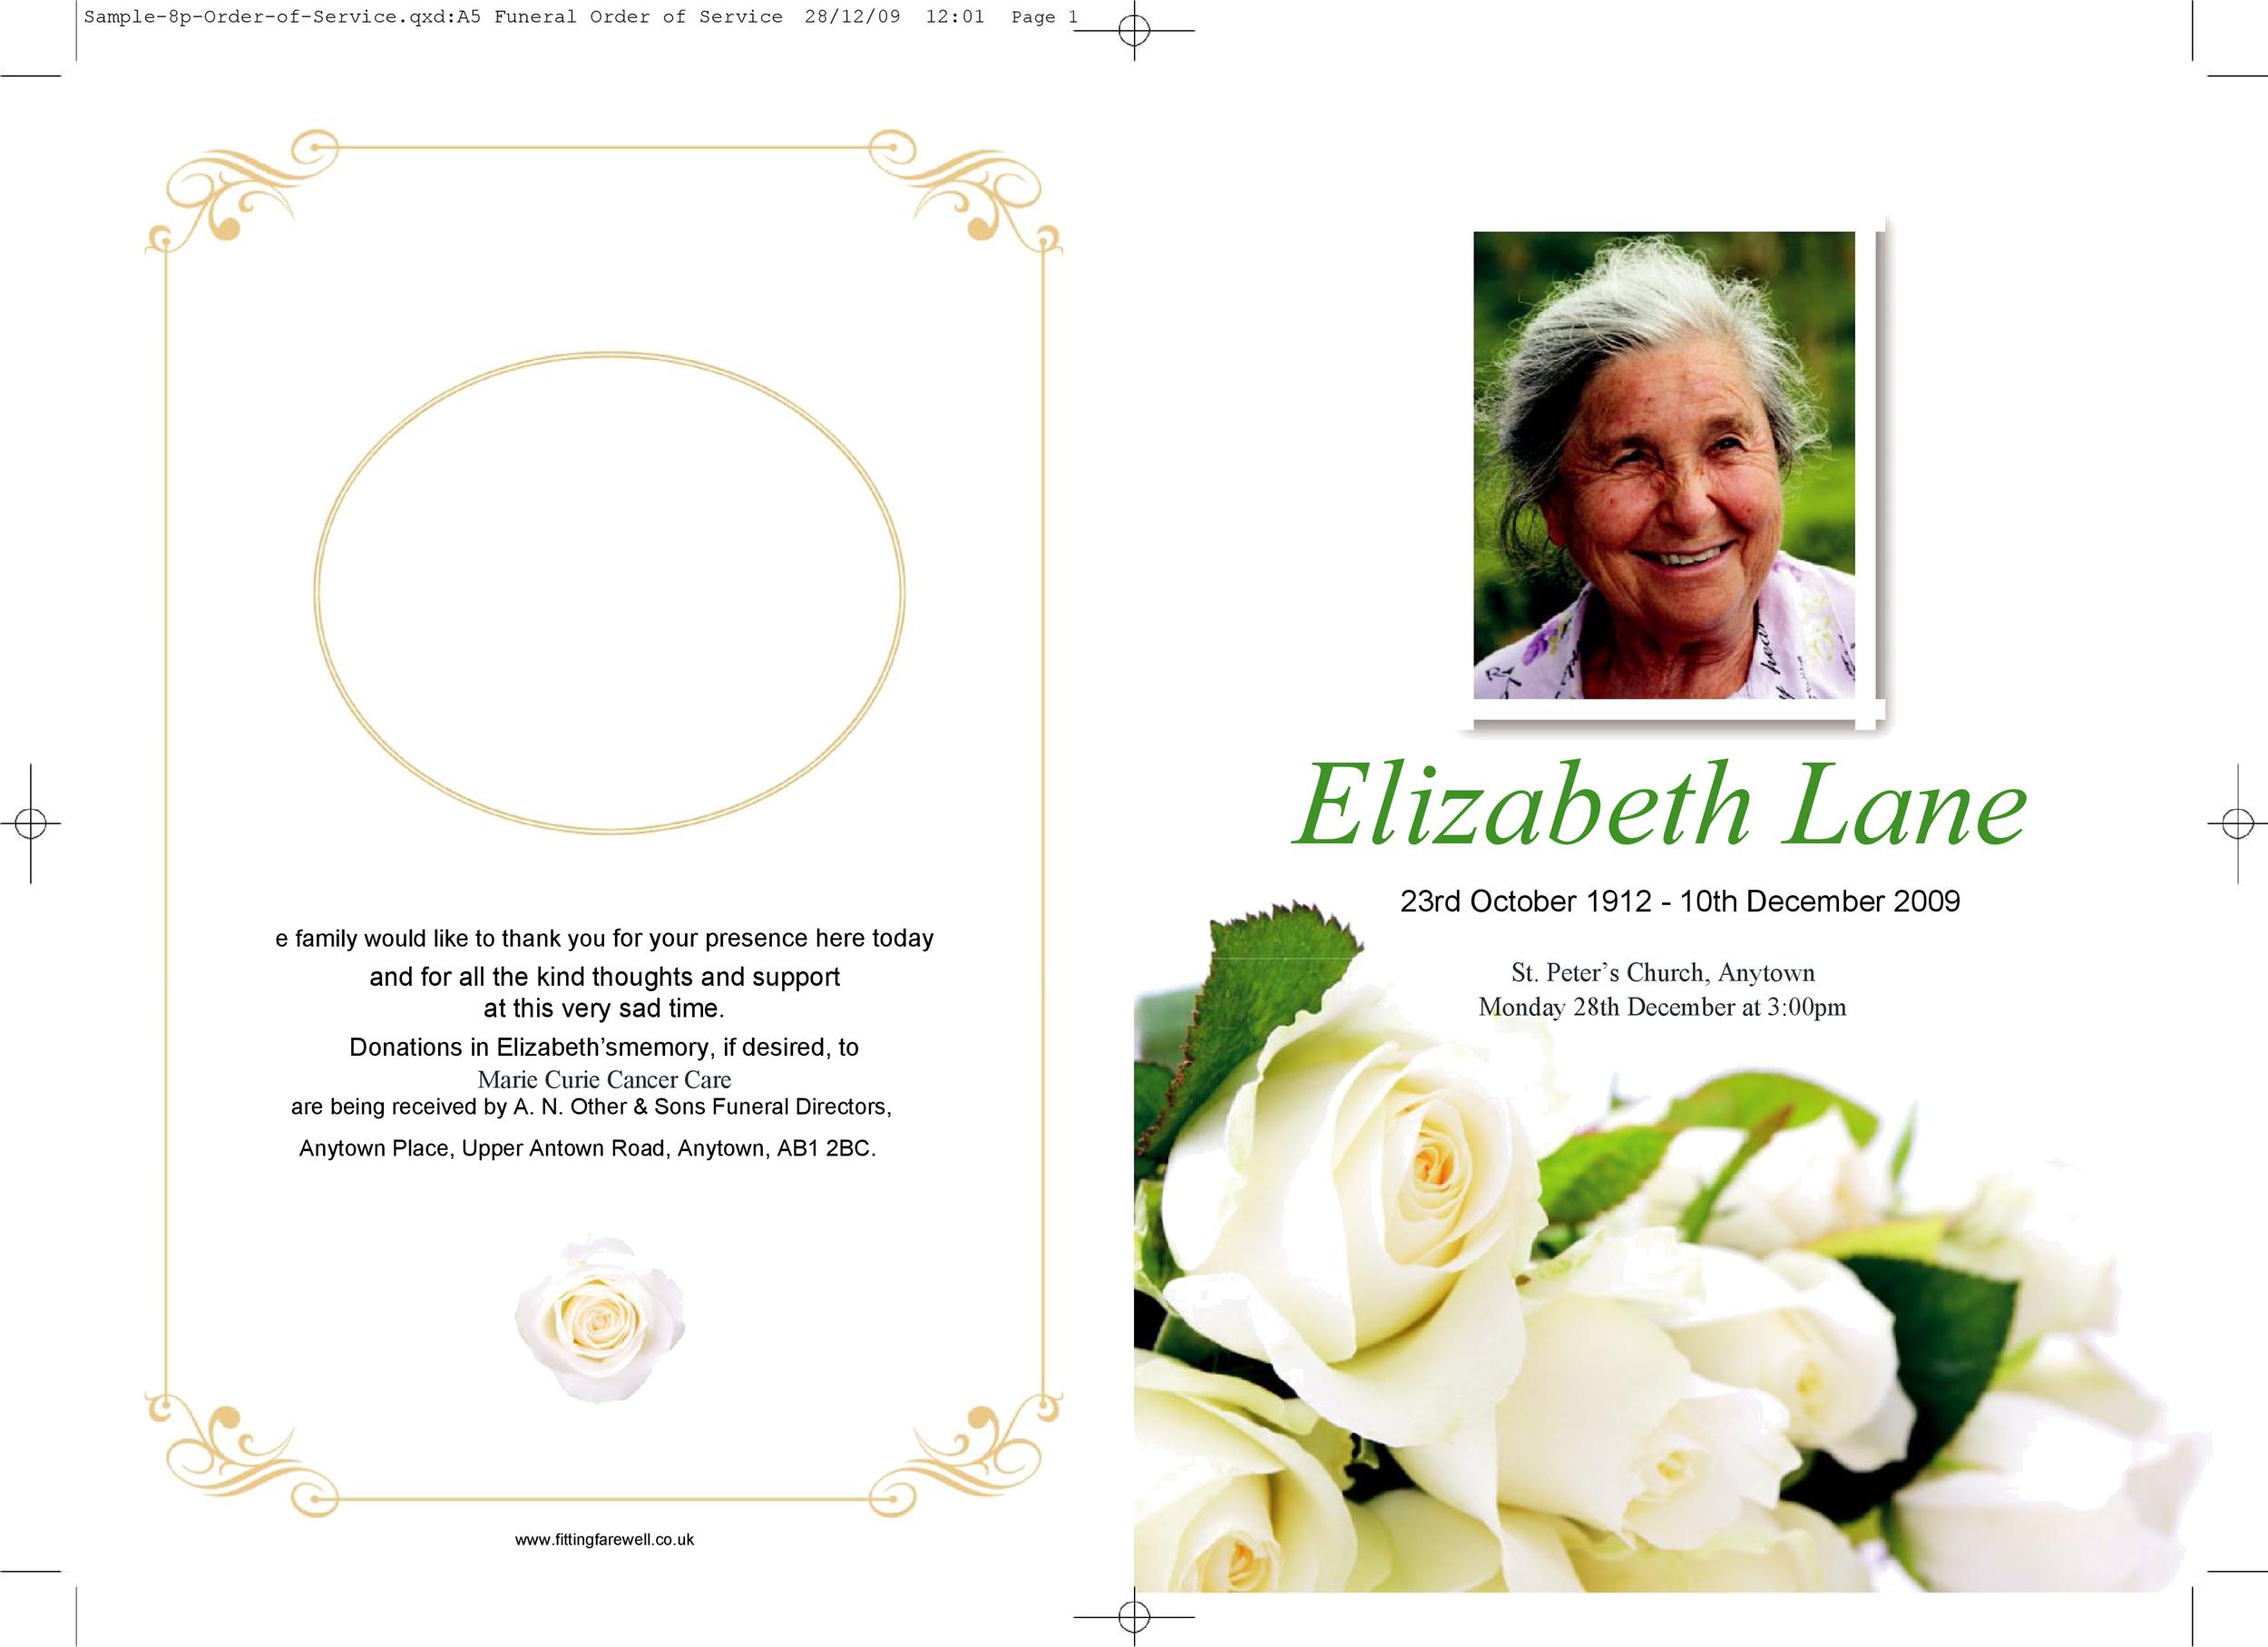 47 Free Funeral Program Templates in Word Format TemplateLab